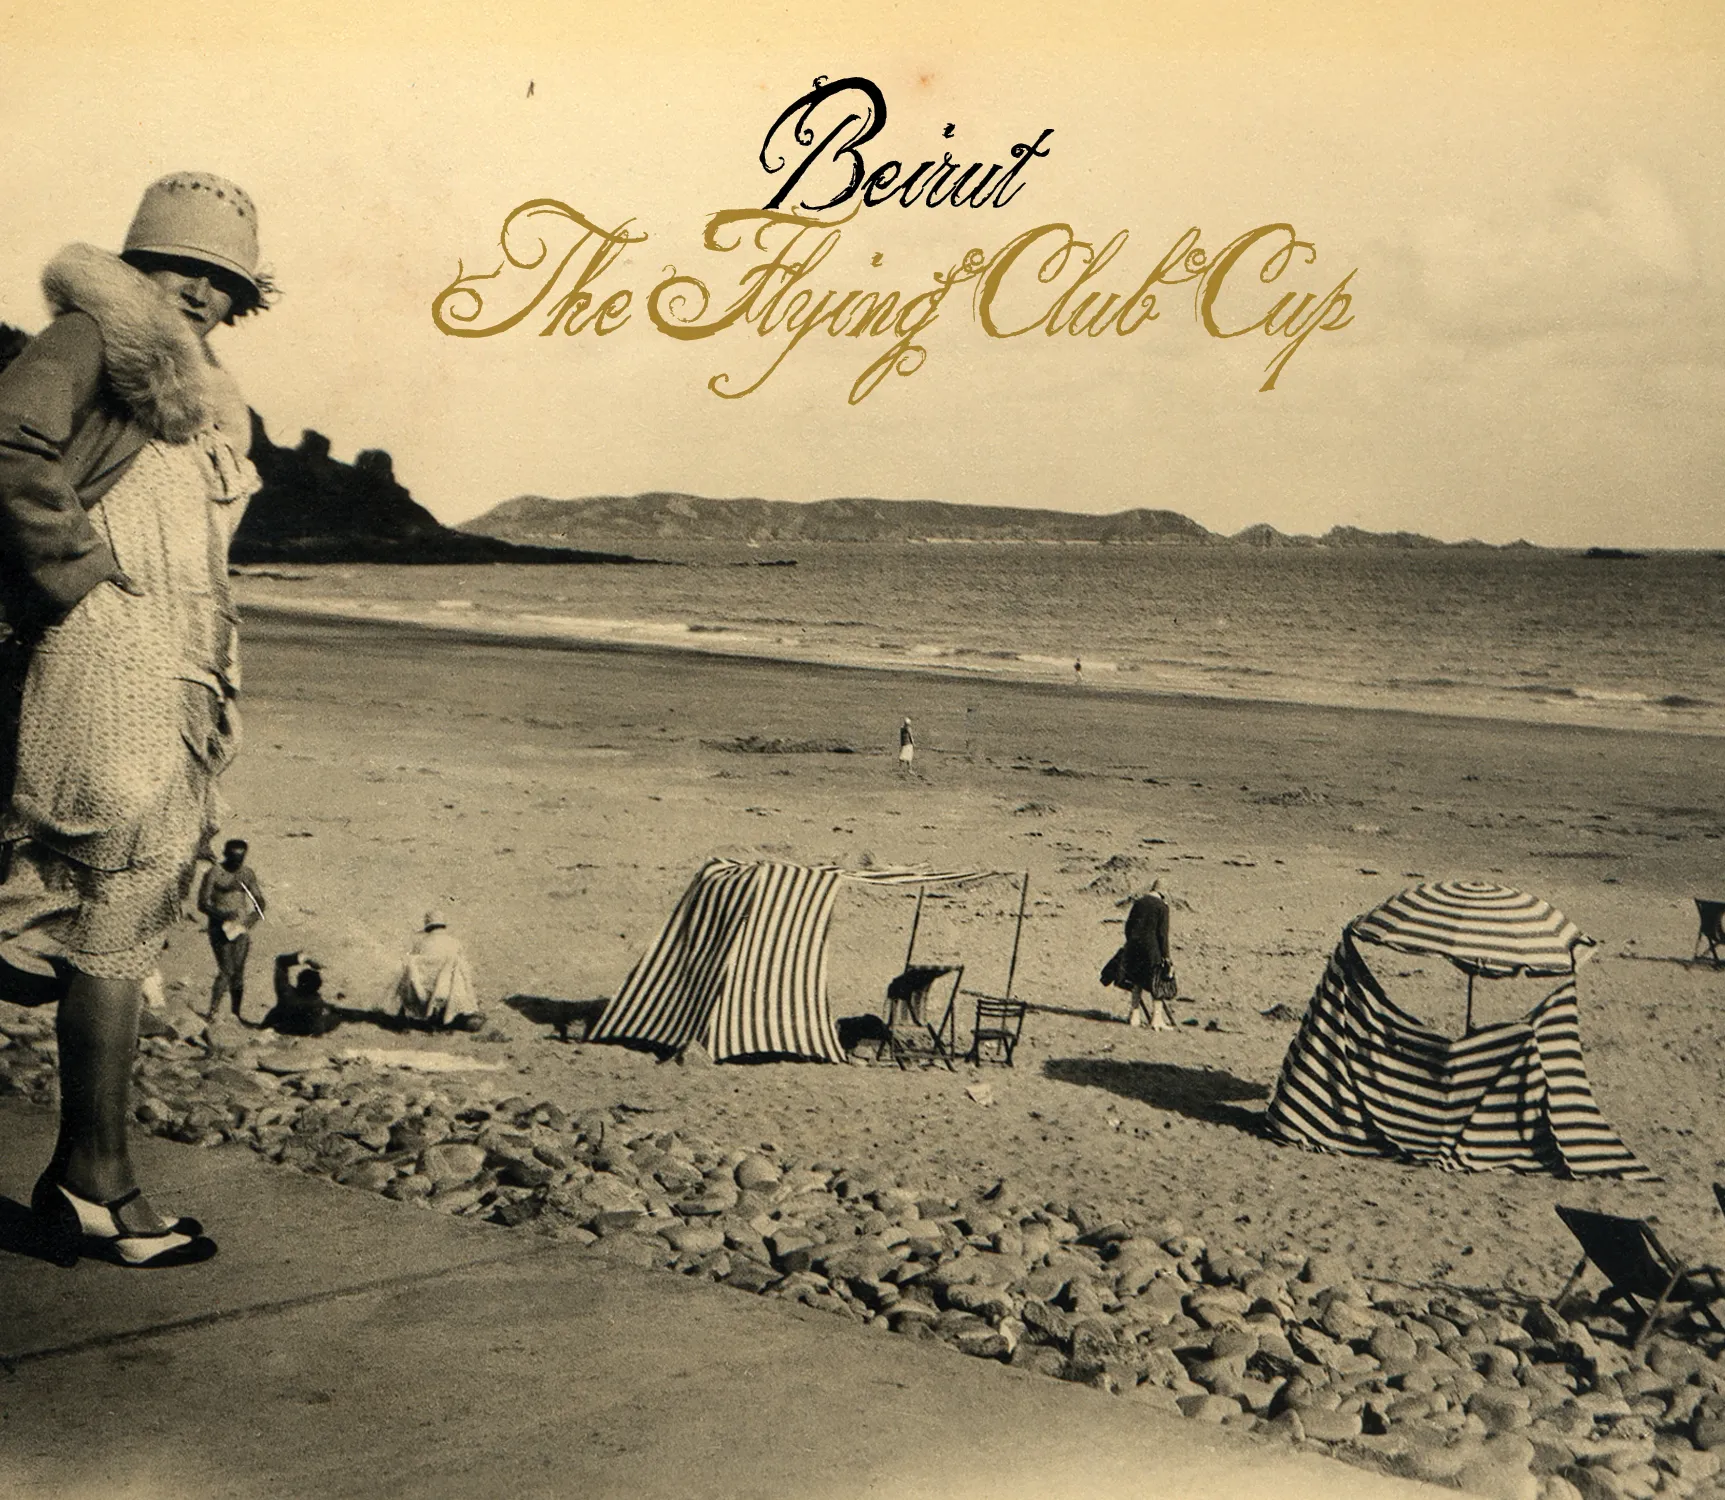 <strong>Beirut - The Flying Club Cup</strong> (Vinyl LP - black)